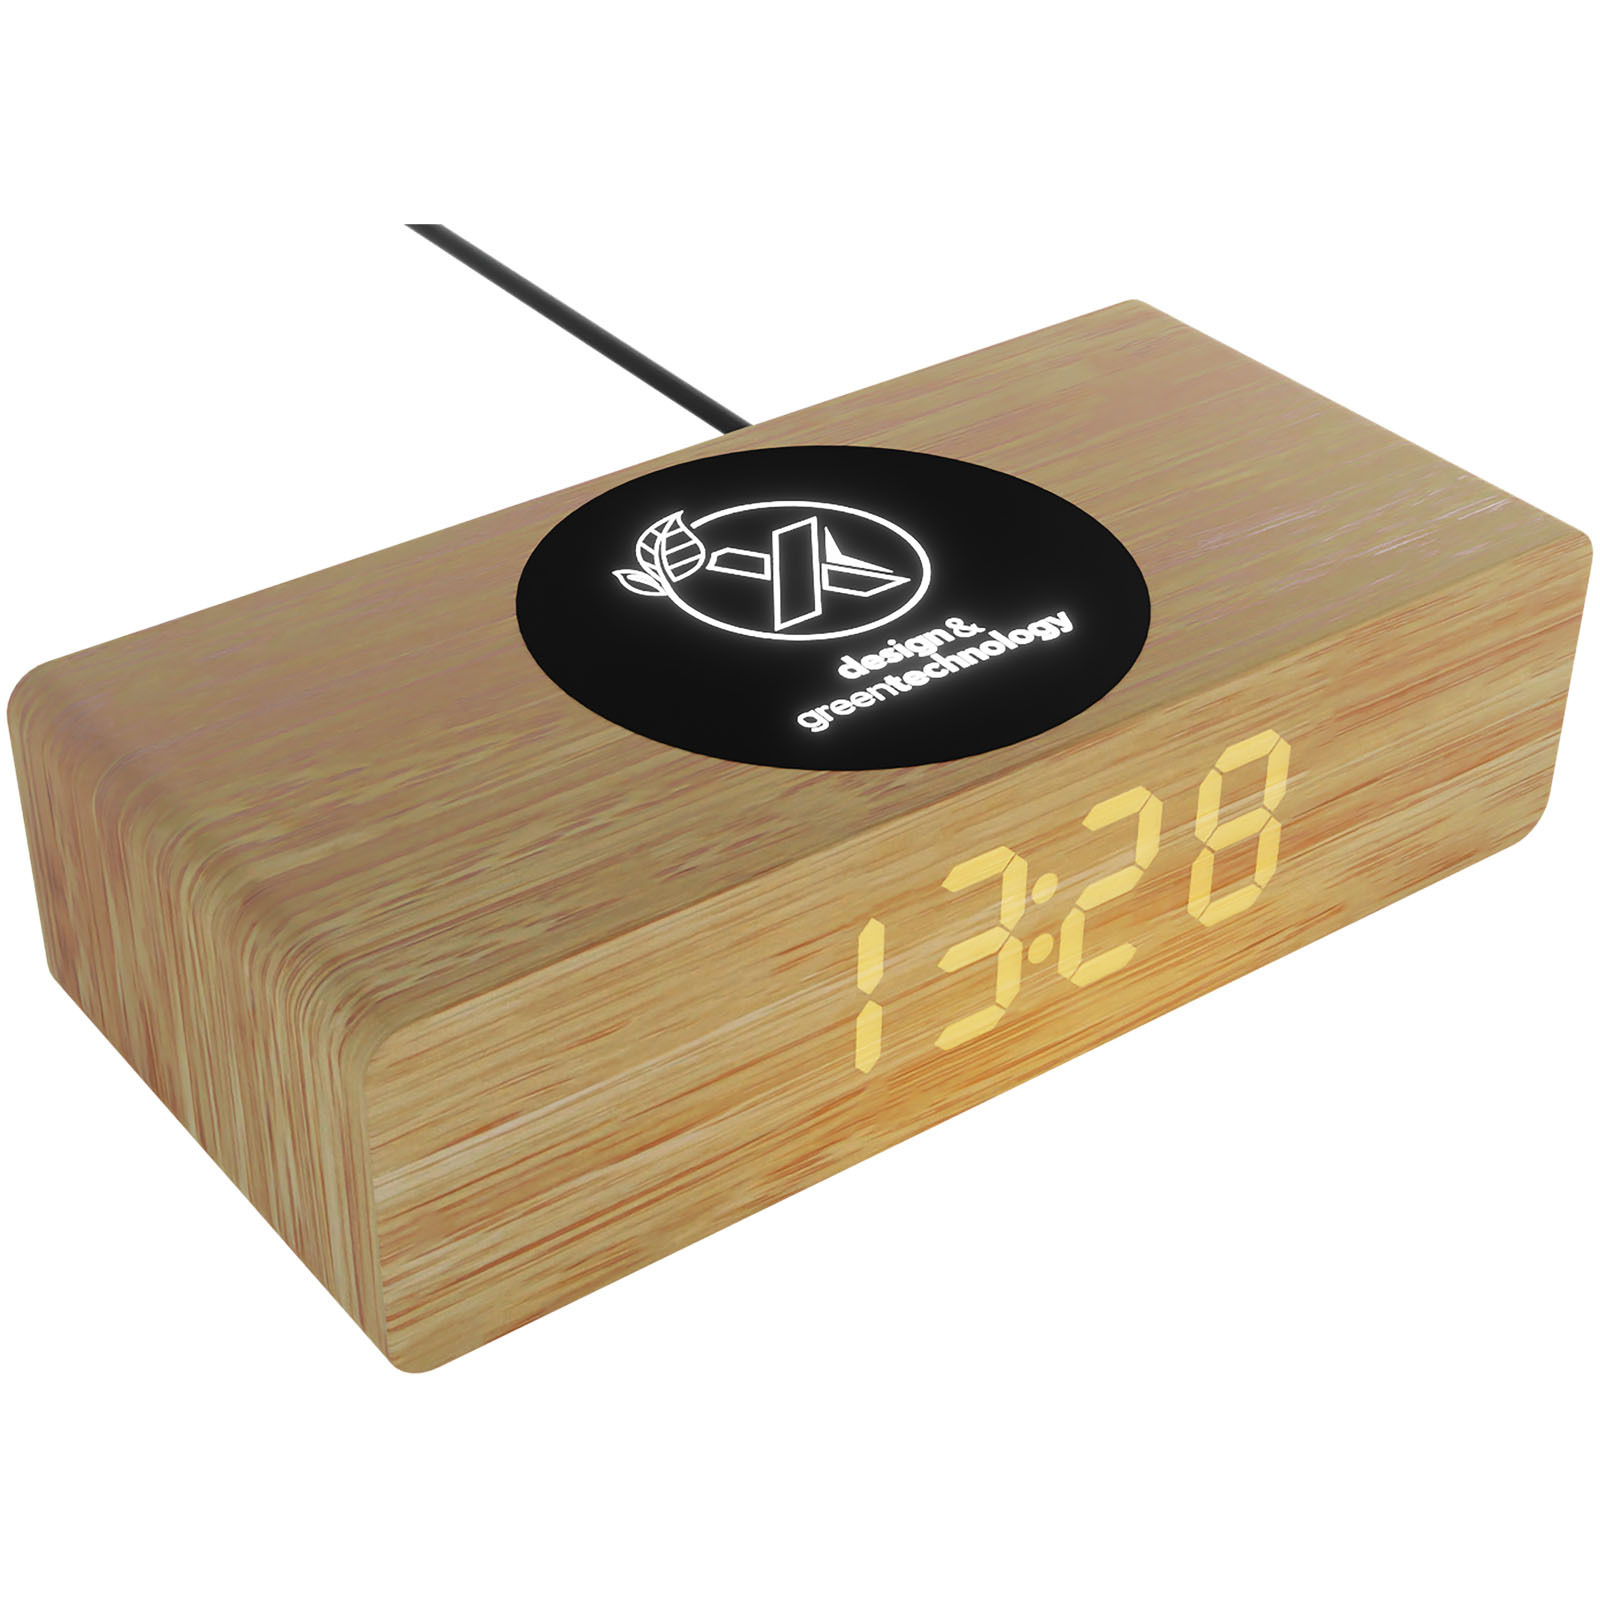 A 10-watt wooden wireless charging station that includes a time and temperature display, as well as a light-up logo. - Ilford